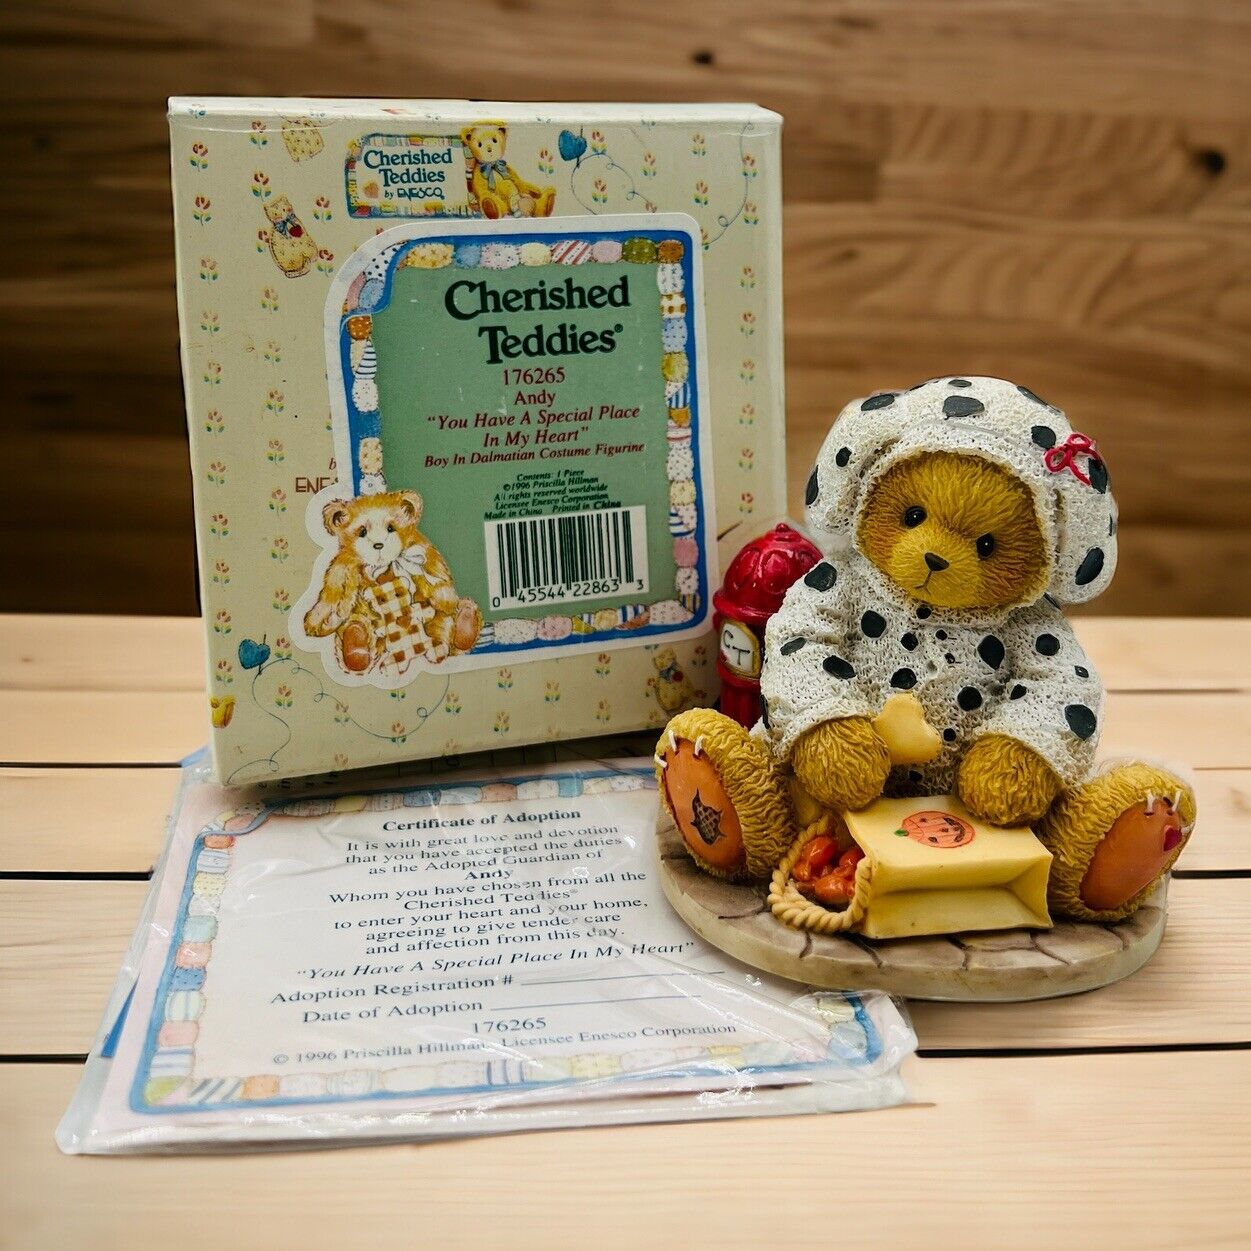 CHERISHED TEDDIES ANDY YOU HAVE A SPECIAL PLACE IN MY HEART 176265 Dalmatian Dog